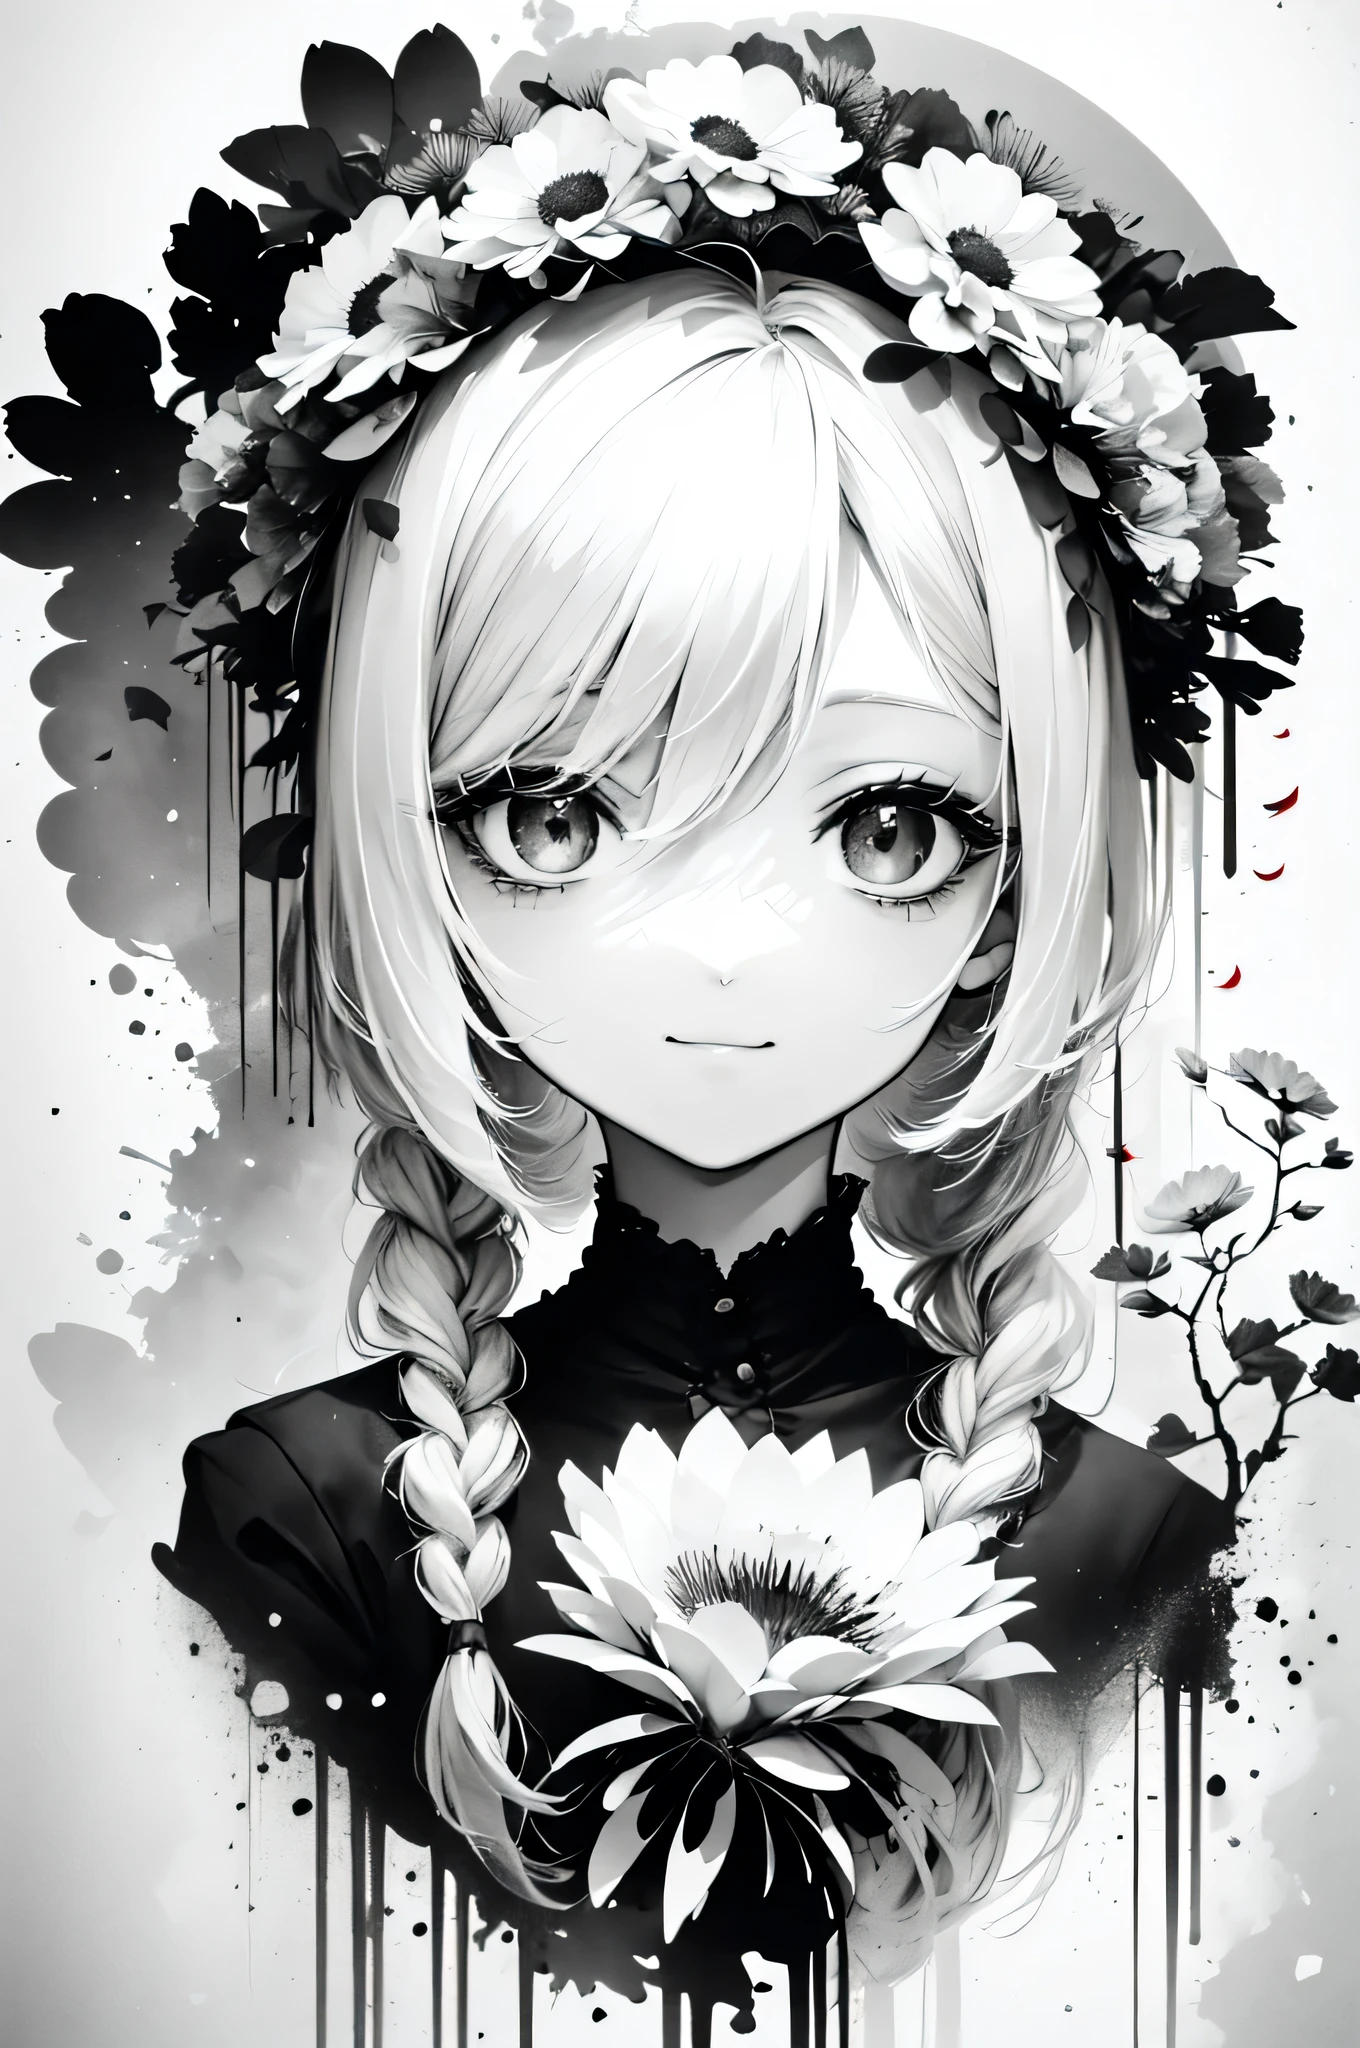 solo,1female\(chibi,cute,kawaii,age of 18,hair color white,braid hair,messy hair,eye color gray,big eyes,white skin,(monochrome:1.2),narrow eyes,smiling vely kindly at viewer,portrait\),background\((many beautiful flowers and petal:1.4)\),double exposure, BREAK ,quality\(8k,wallpaper of extremely detailed CG unit, ​masterpiece,high resolution,top-quality,top-quality real texture skin,hyper realisitic,increase the resolution,RAW photos,best qualtiy,highly detailed,the wallpaper\),(high contrast:1.4),(grayscale:1.6),monochrome